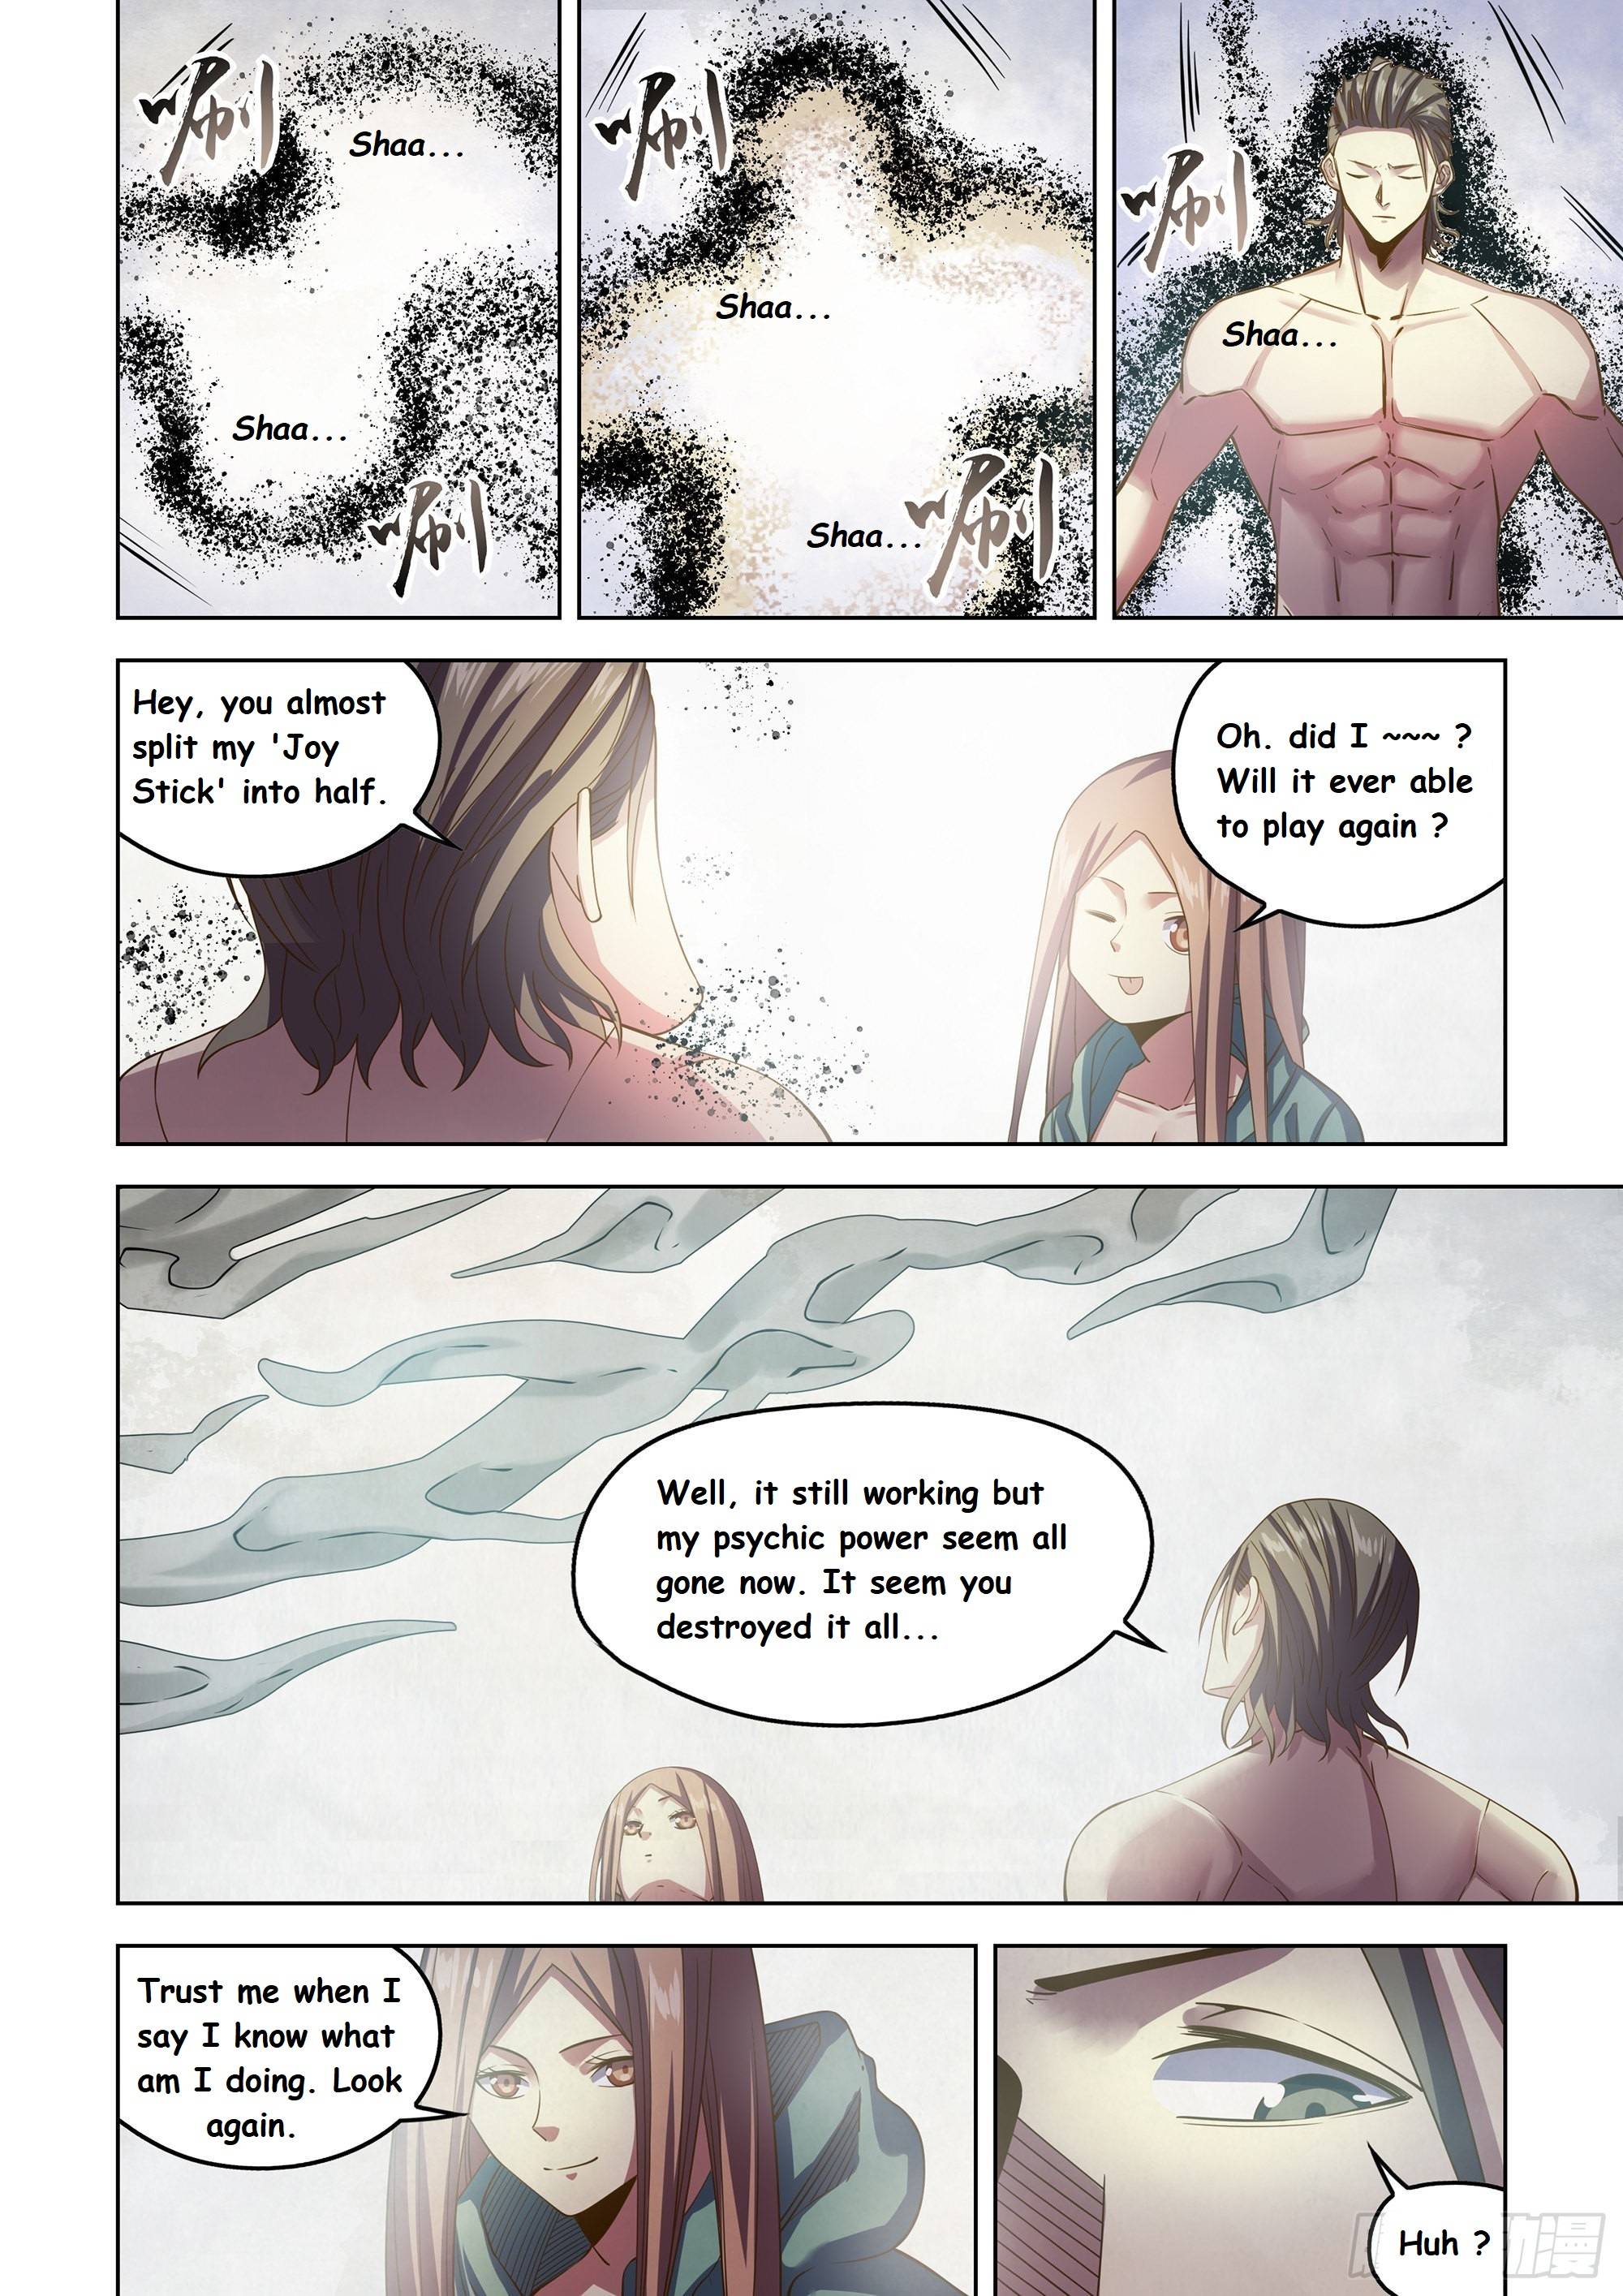 The Last Human chapter 464 page 12